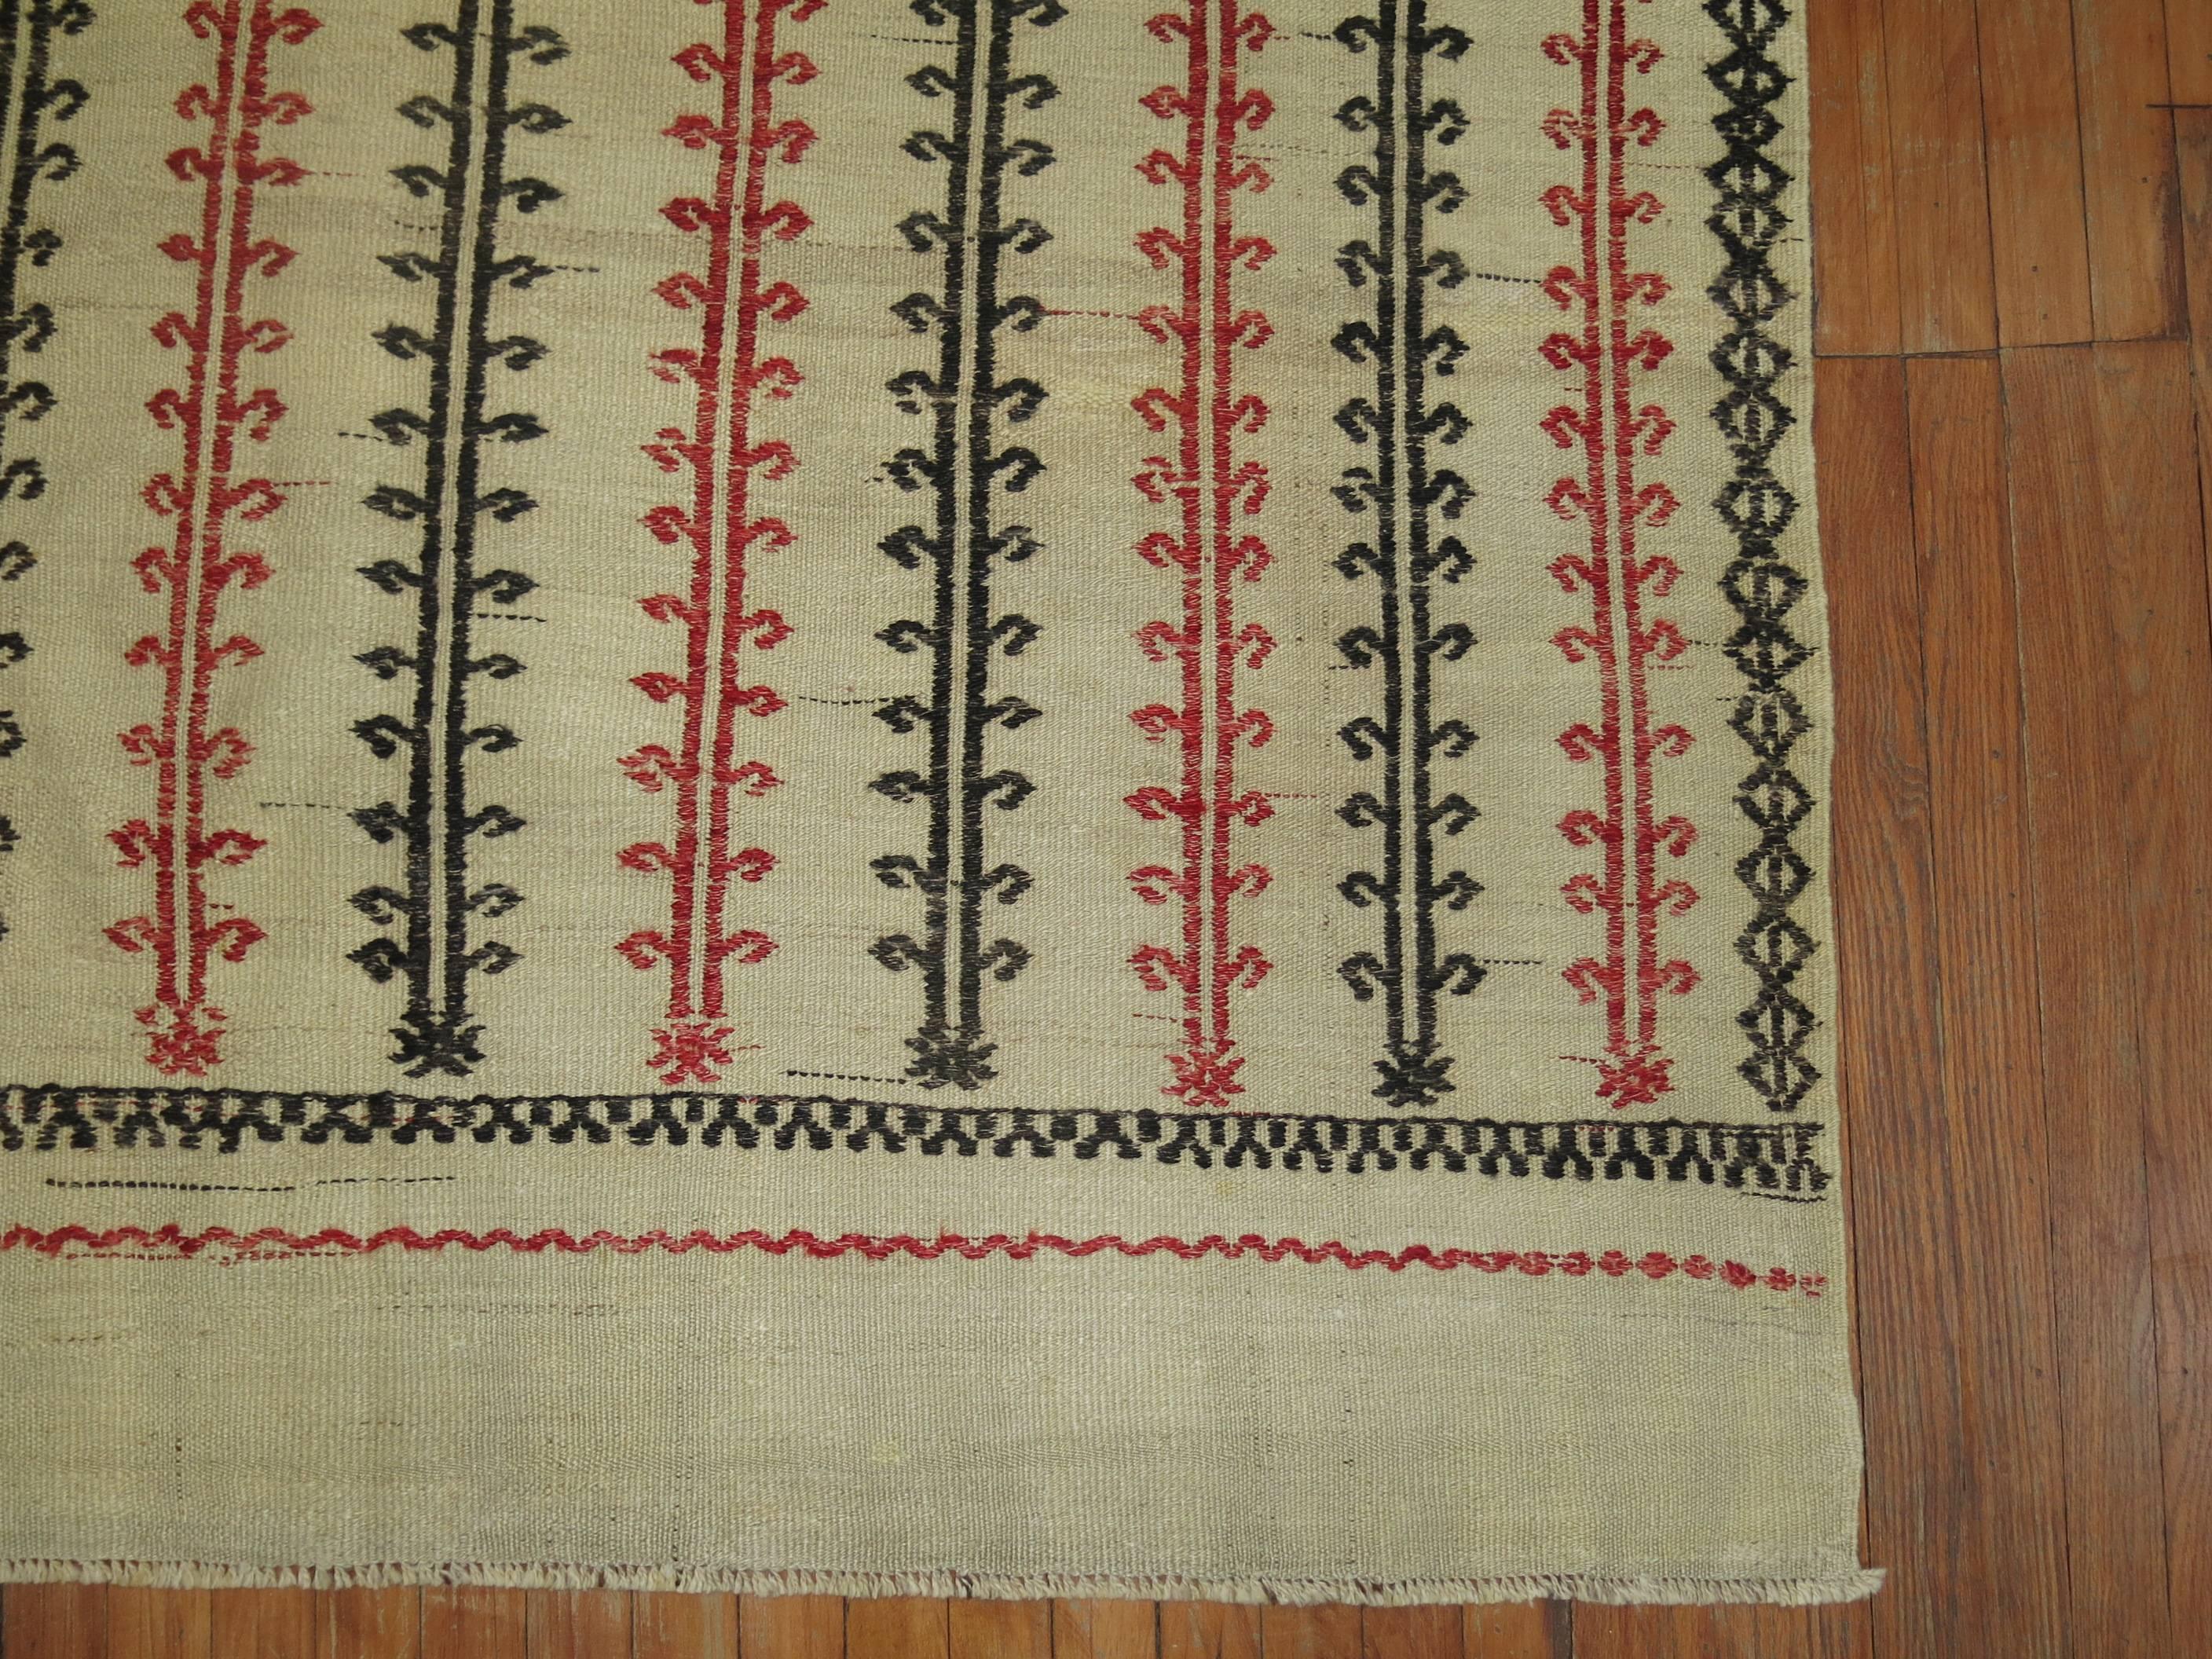 One of a kind vintage Turkish Kilim in shades of white, red and black.